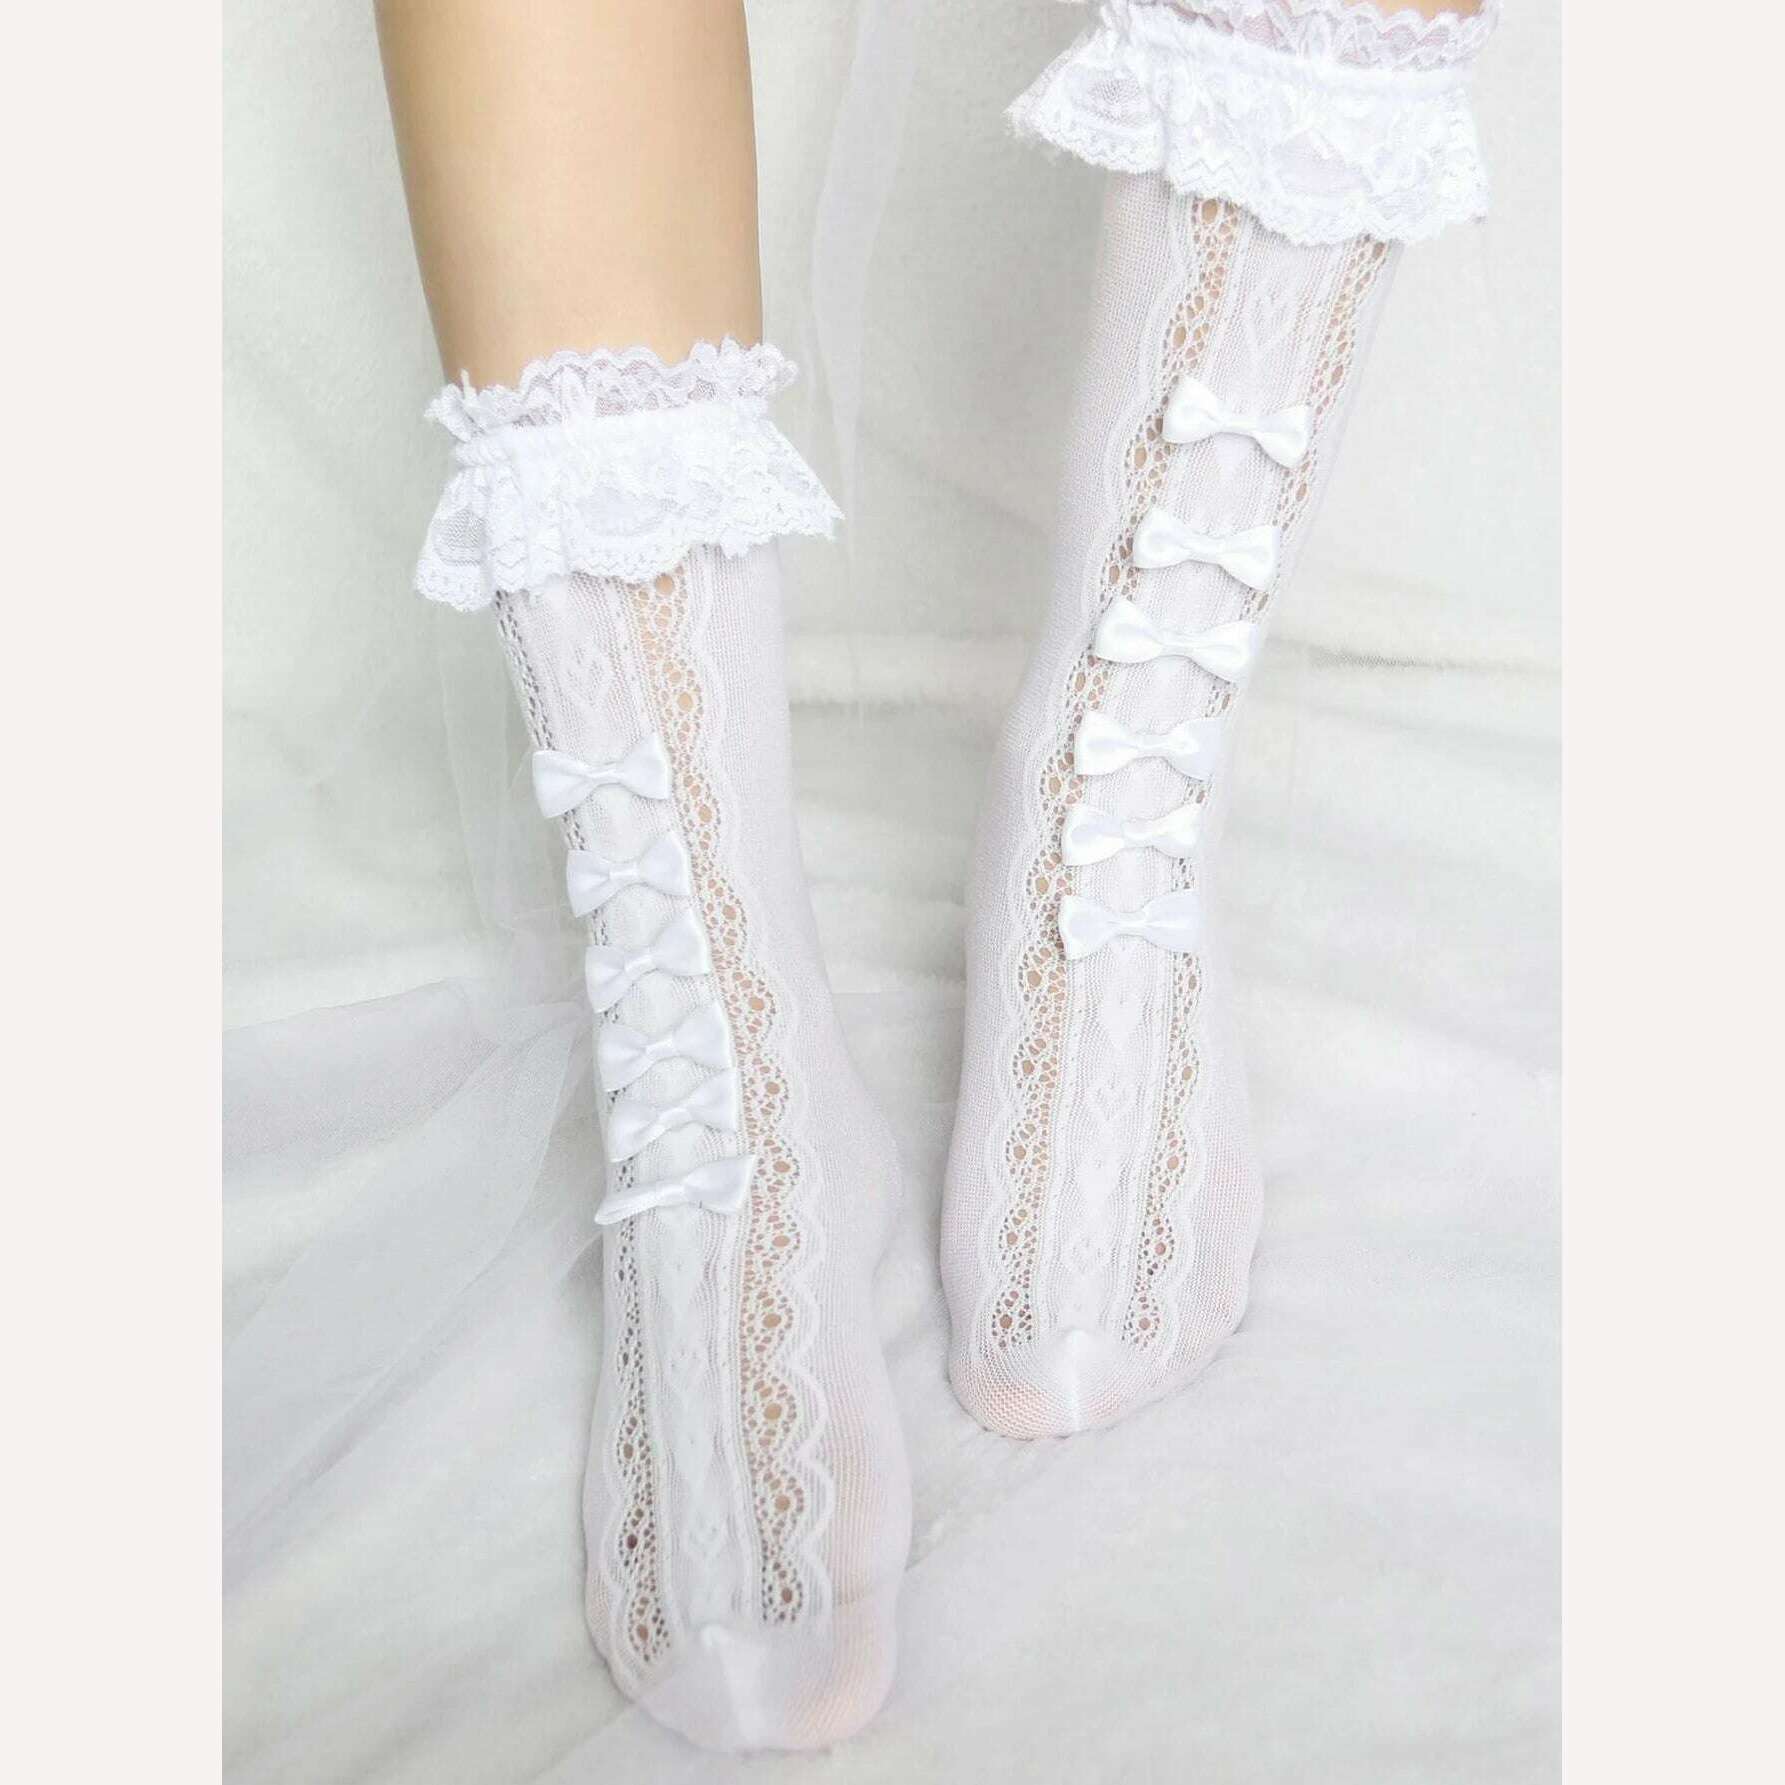 KIMLUD, 1 pair of bow shaped mid length stockings JK girls lace lace stockings Lolita princess coa long length lace bow shaped stockings, WHITE / One Size, KIMLUD Womens Clothes